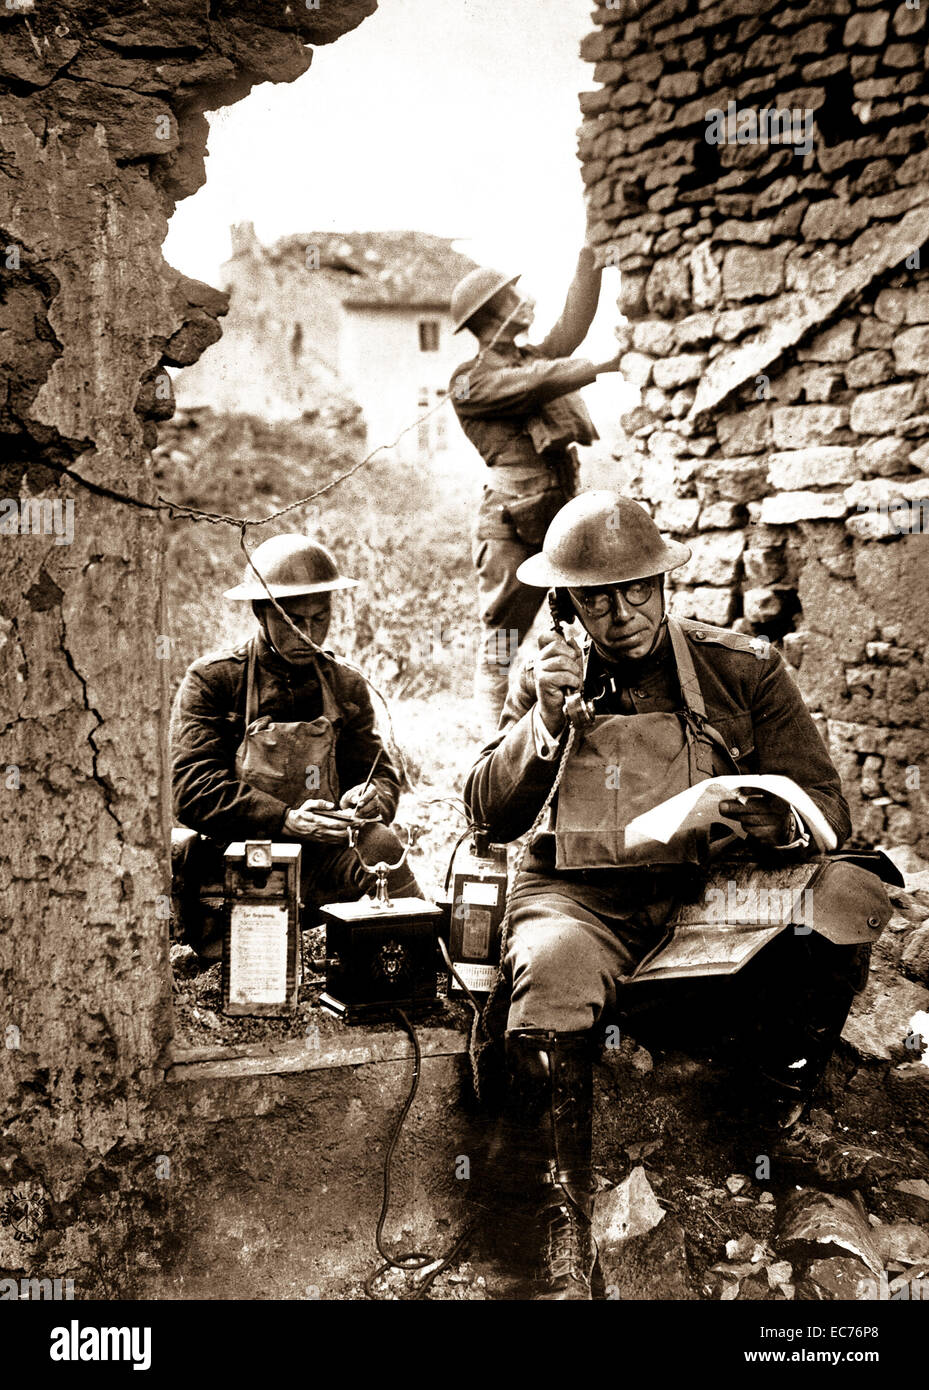 Lt. Col. R. D. Garrett, chief signal officer, 42nd Division, testing a telephone left behind by the Germans in the hasty retreat from the salient of St. Mihiel.  Essey, France.  September 19, 1918.  Cpl. R. H. Ingleston. Stock Photo